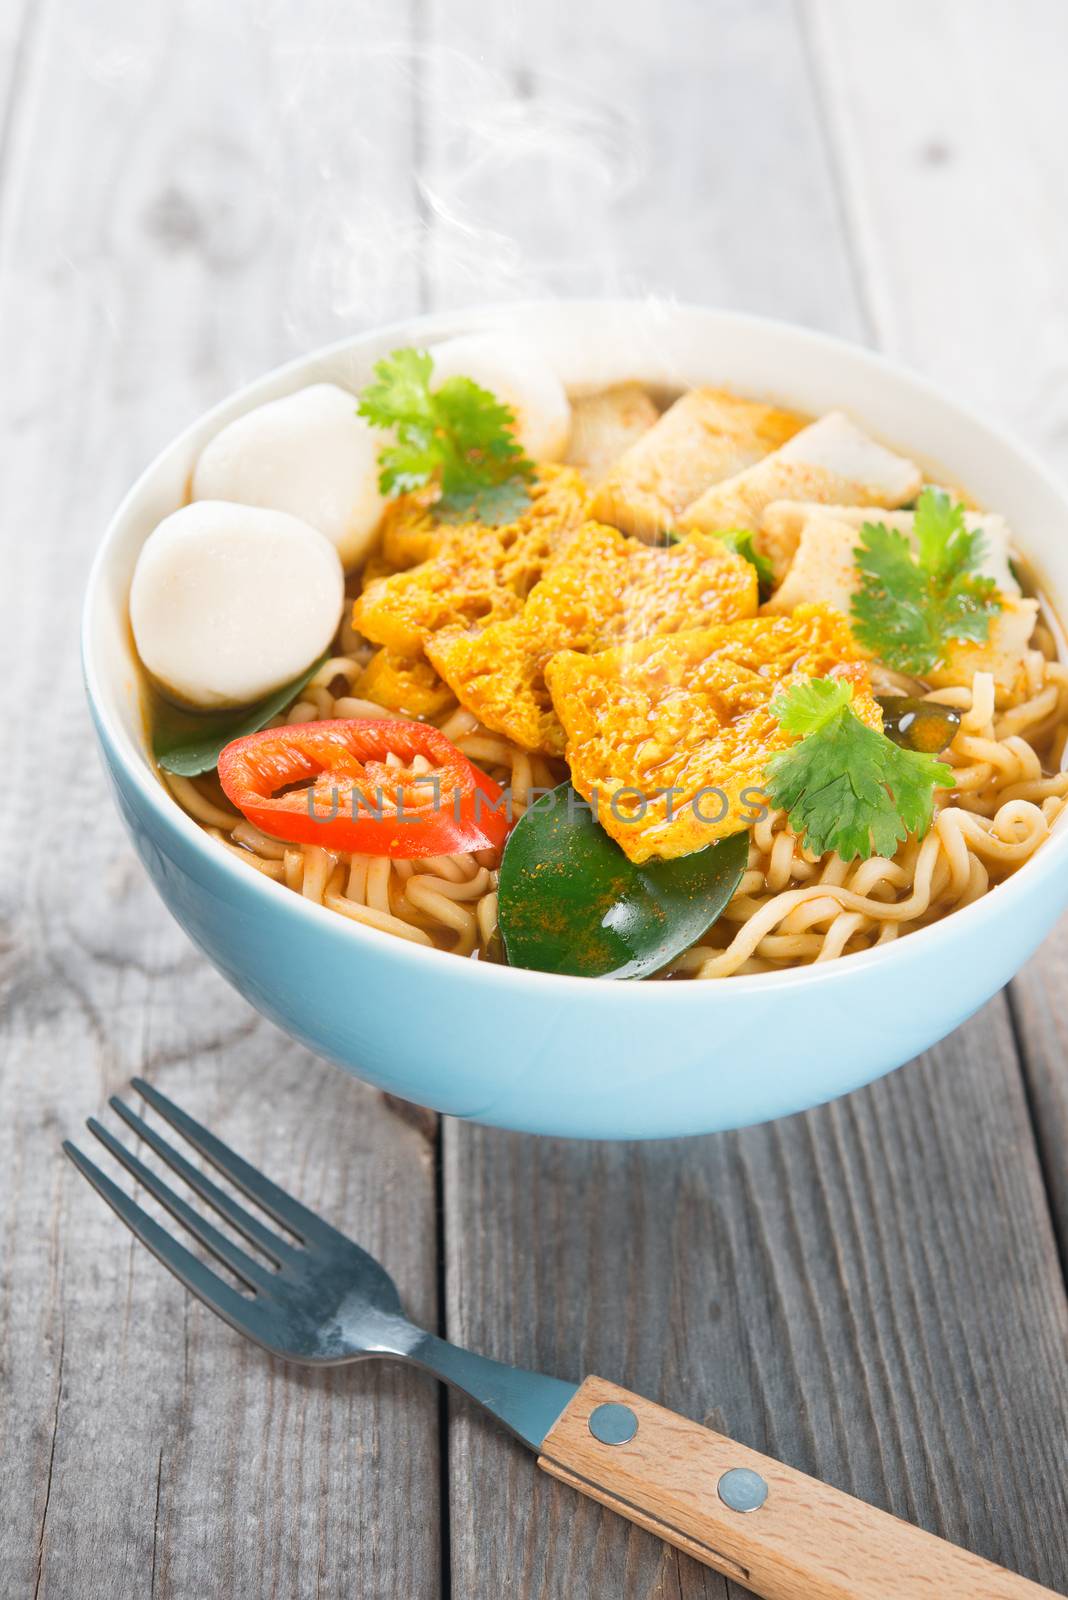 Spicy curry instant noodles soup by szefei